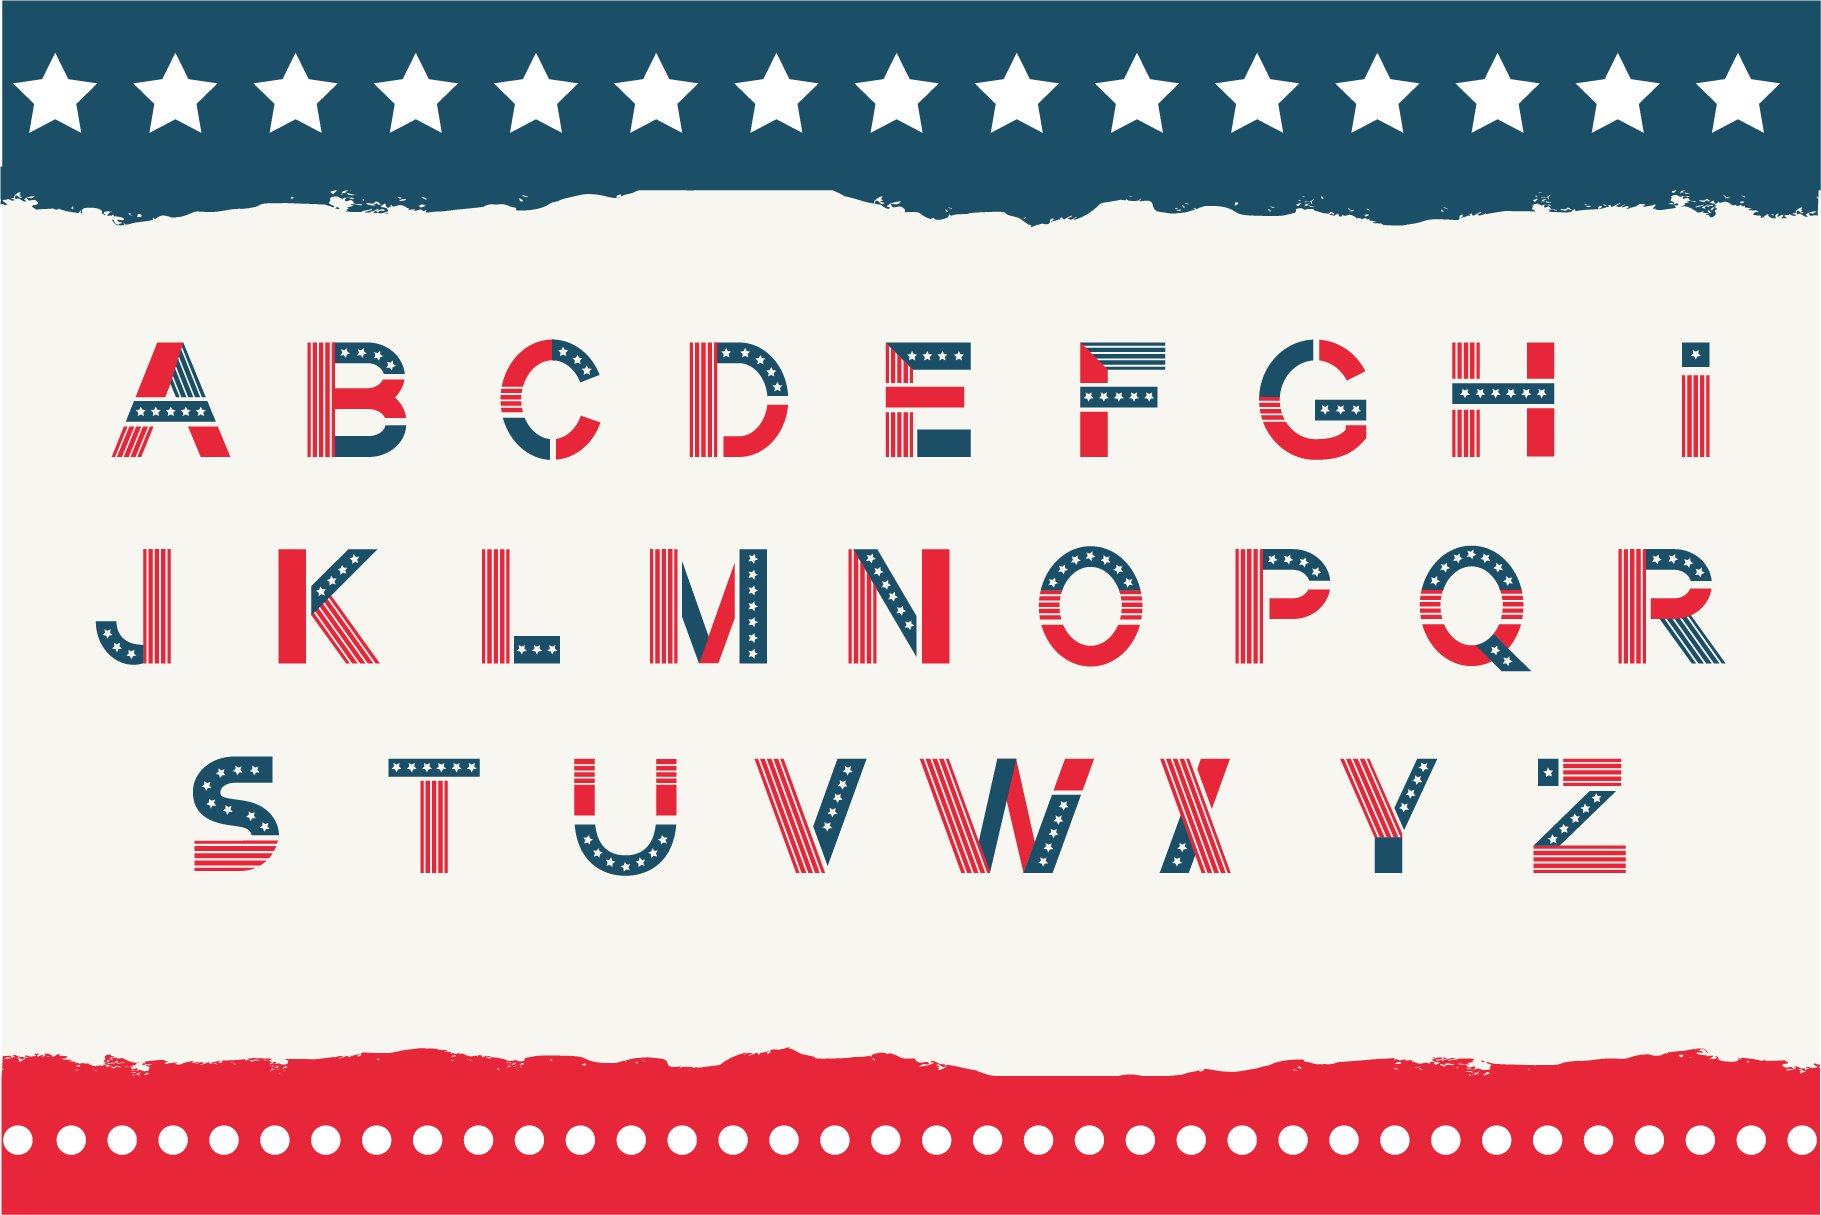 America otf color font. preview image.